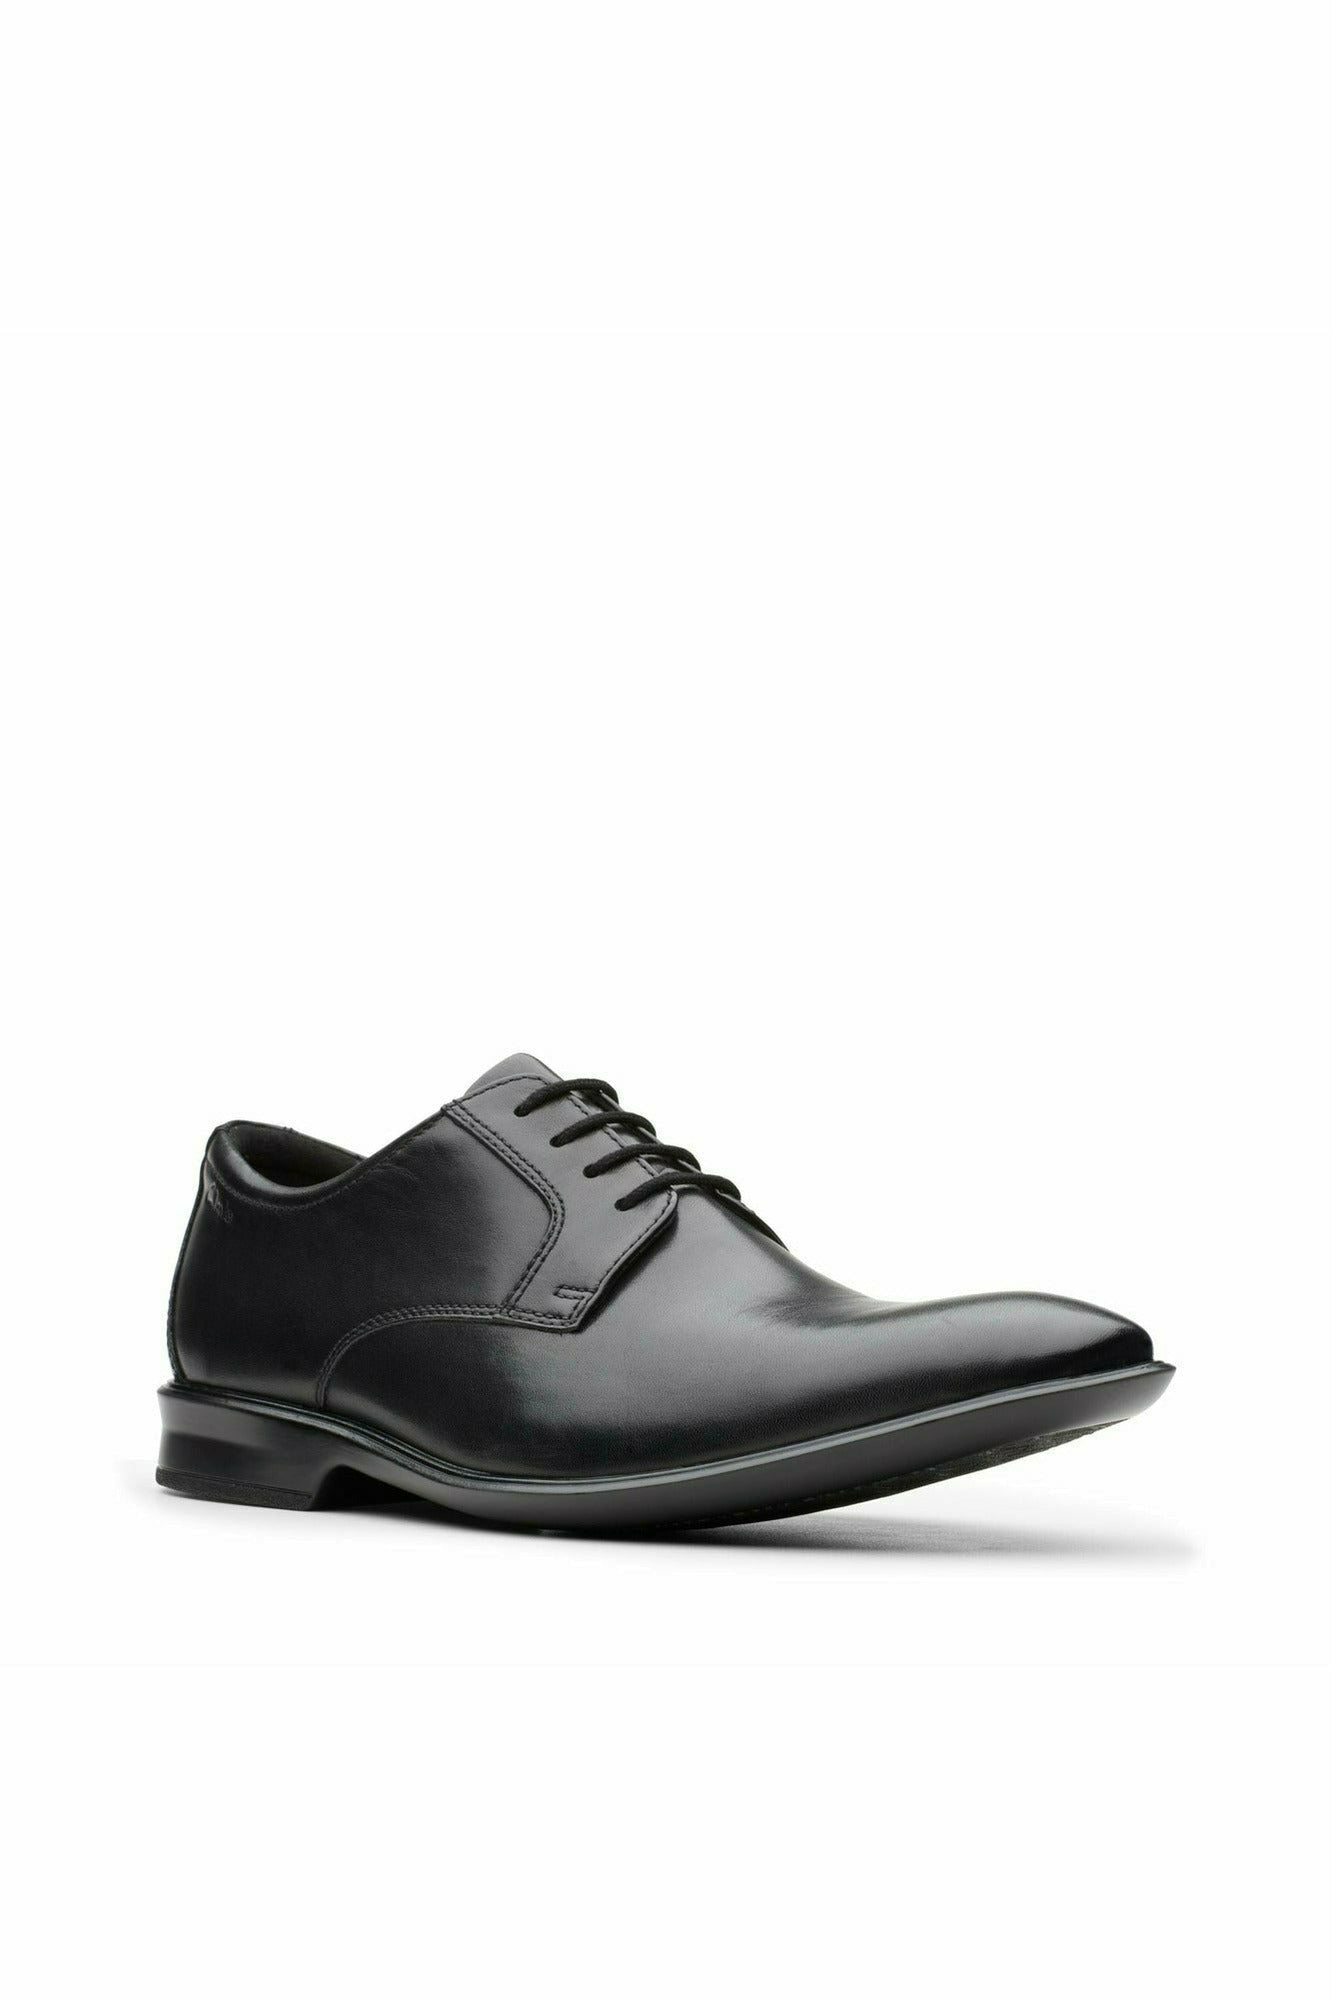 Clarks Bensley Lace Black leather